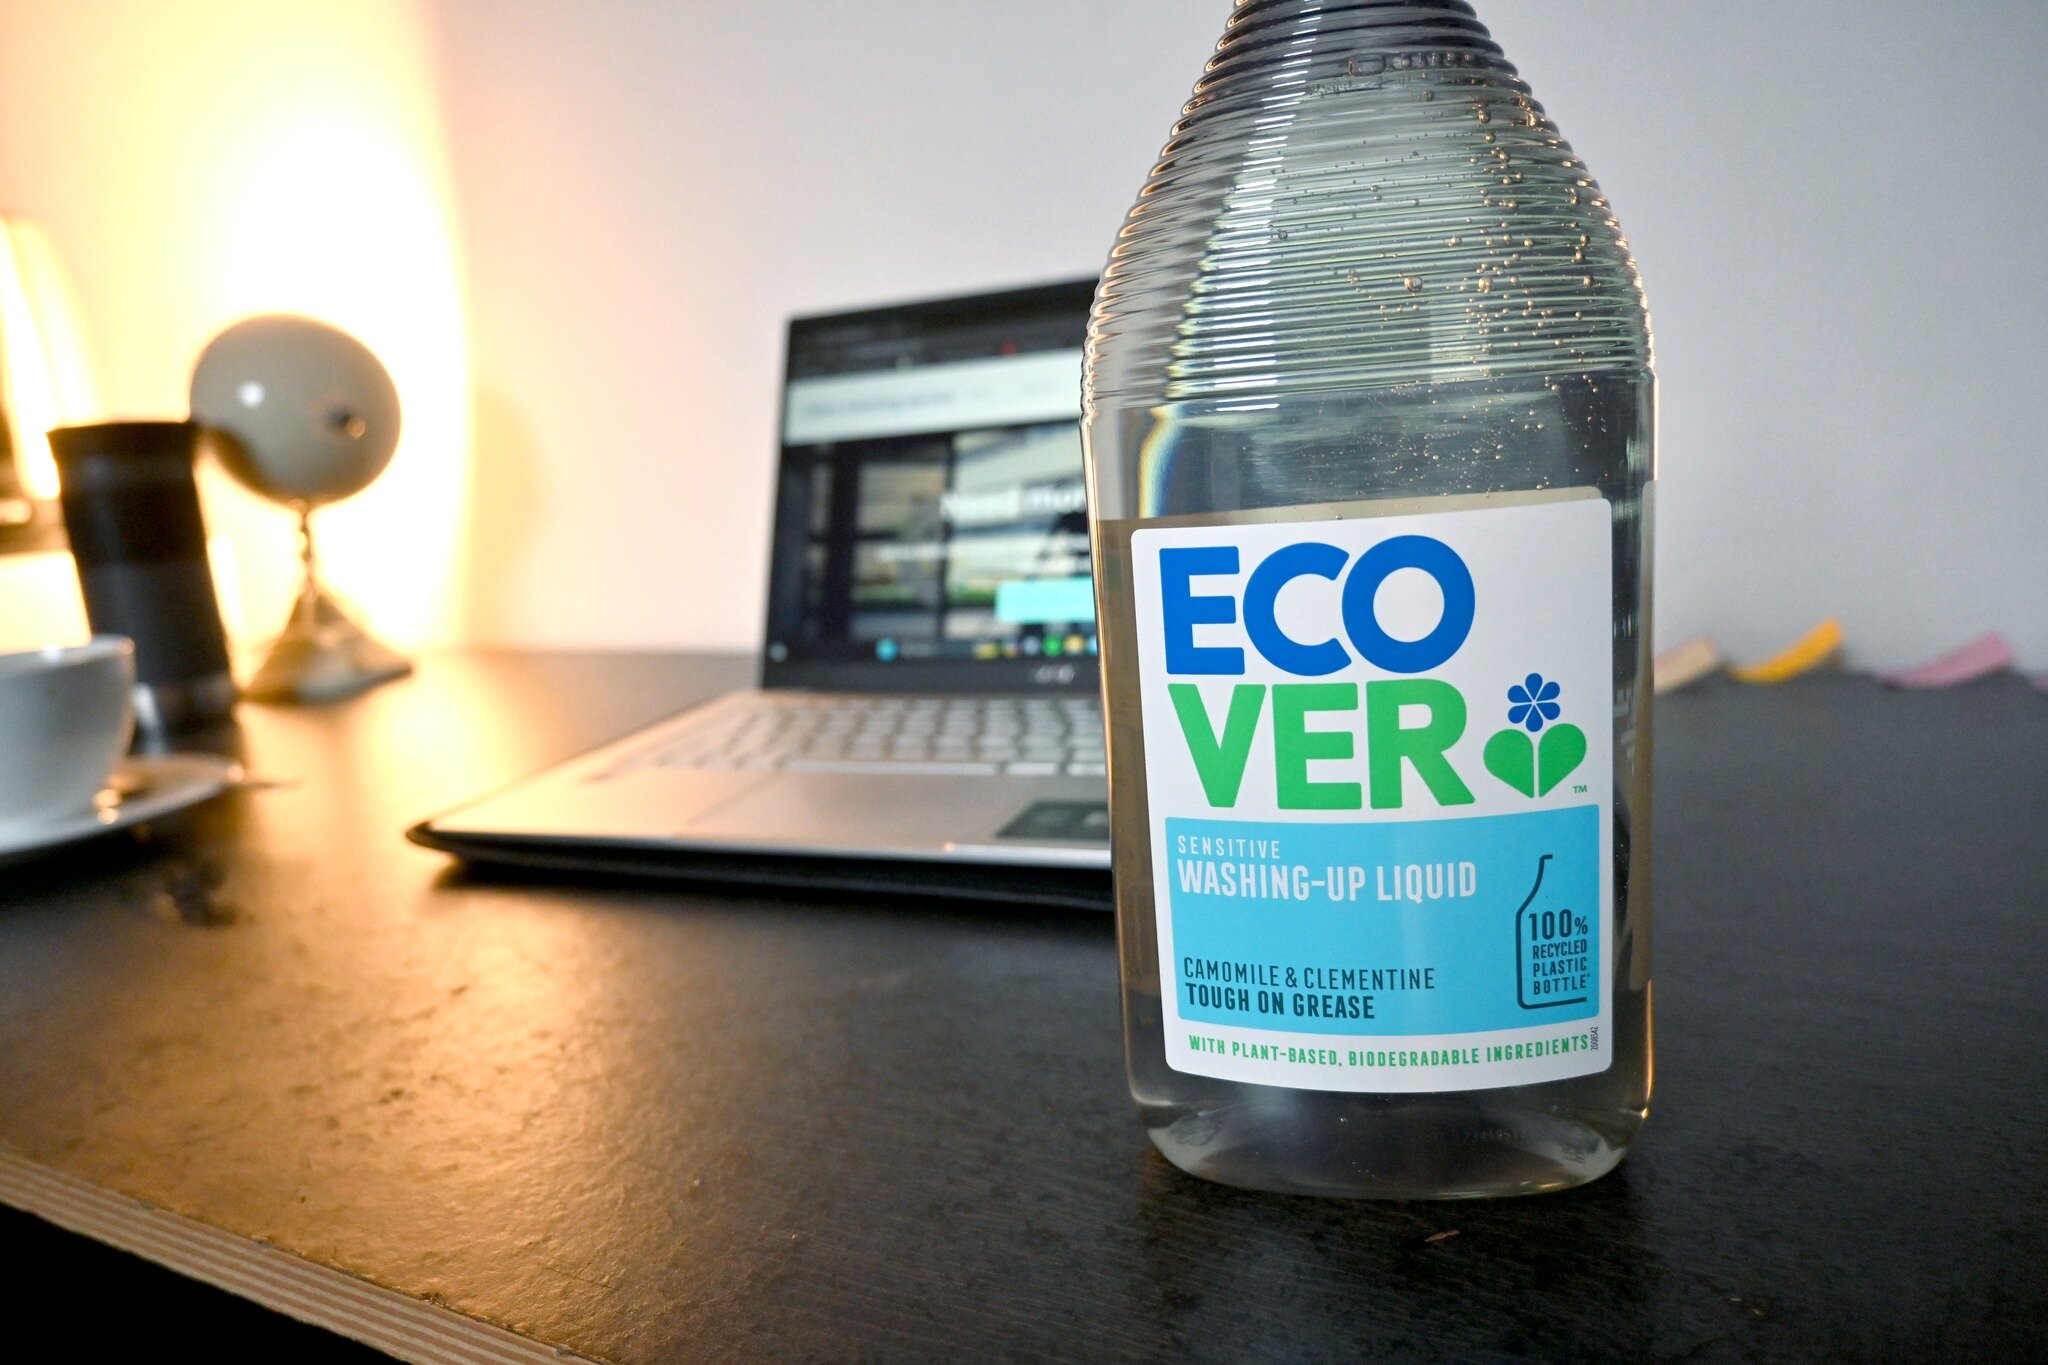 Very happy to announce&hellip; today begins the eventual integration of Eco-ver products 🎉🎊 They are quite expensive but because Ollie&rsquo;s cleaning service does things with everyone in mind and not just profits, it&rsquo;s worth it! 

My custom